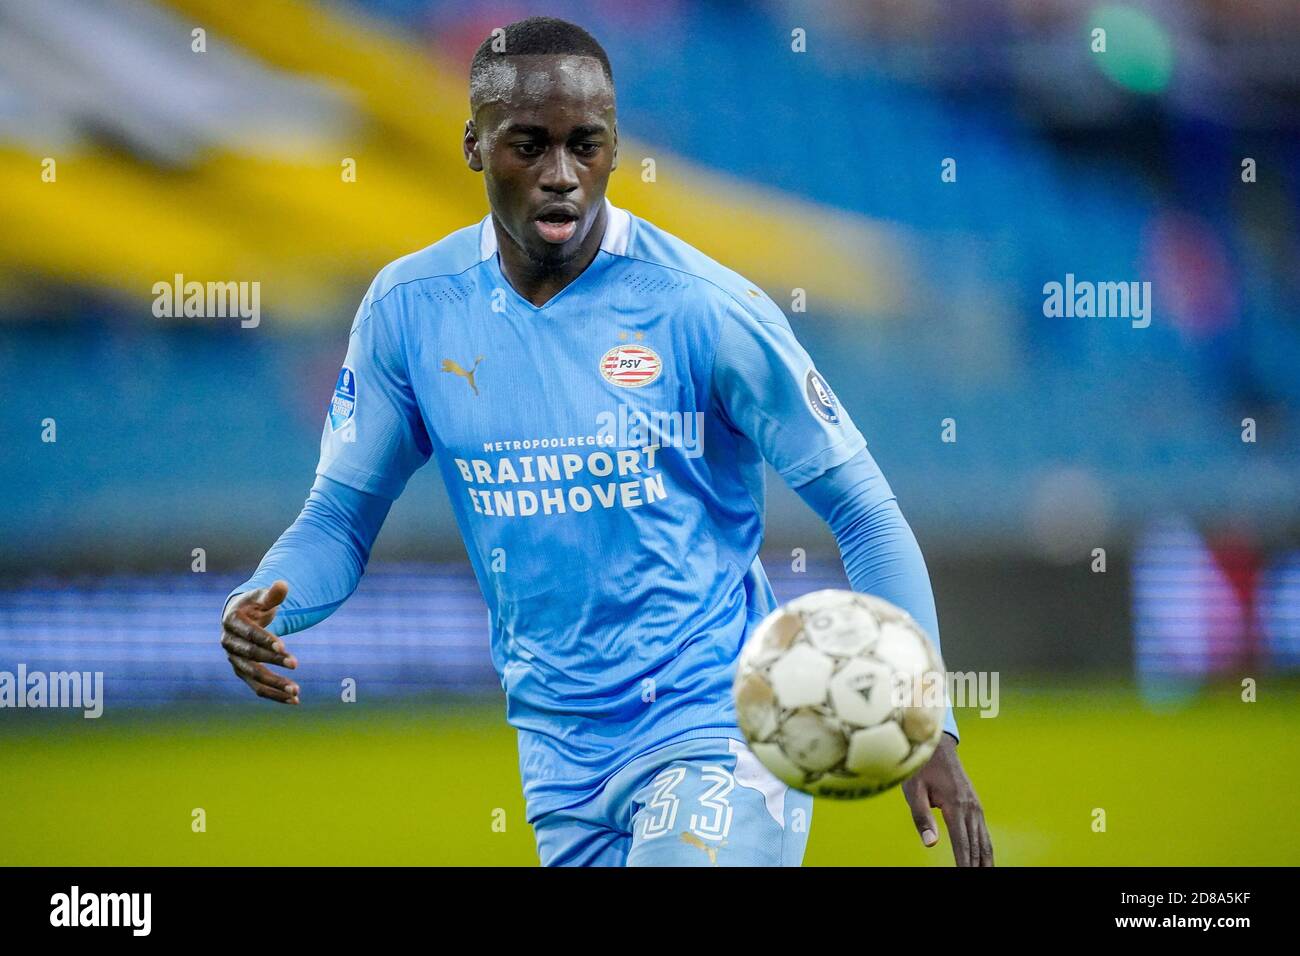 Jordan Teze of PSV during the Netherlands championship Eredivisie football match between Vitesse and PSV on October 25, 2020 at Gelredome Stadium in C Stock Photo